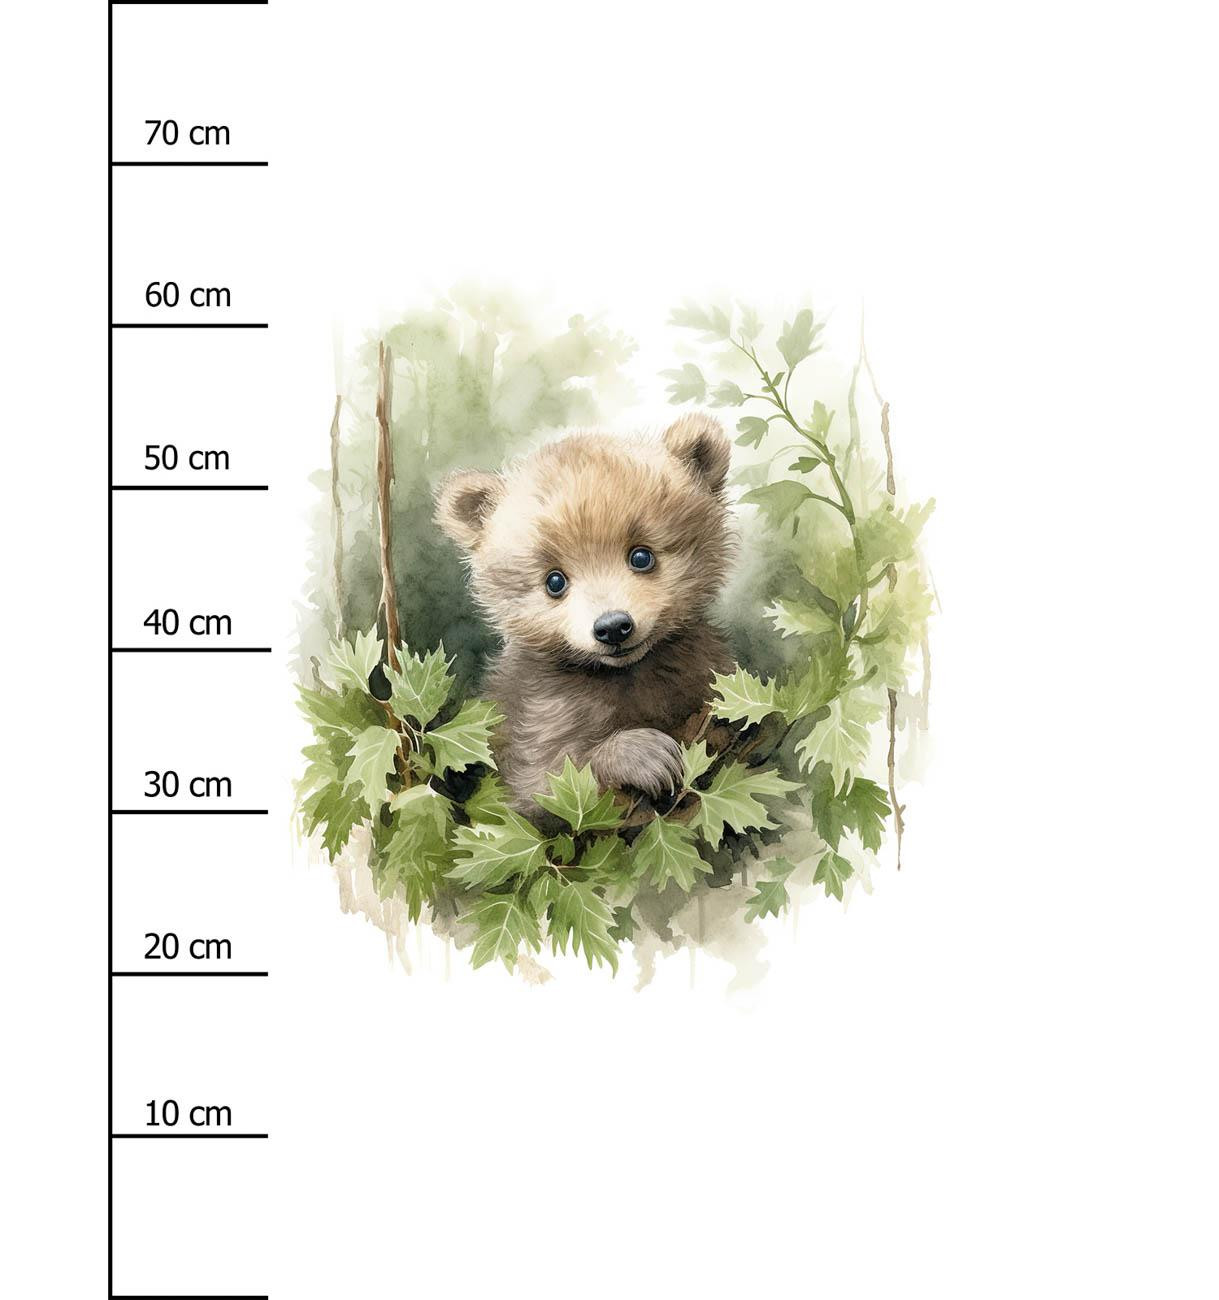 WATERCOLOR LITTLE BEAR - panel (75cm x 80cm) brushed knitwear with elastane ITY